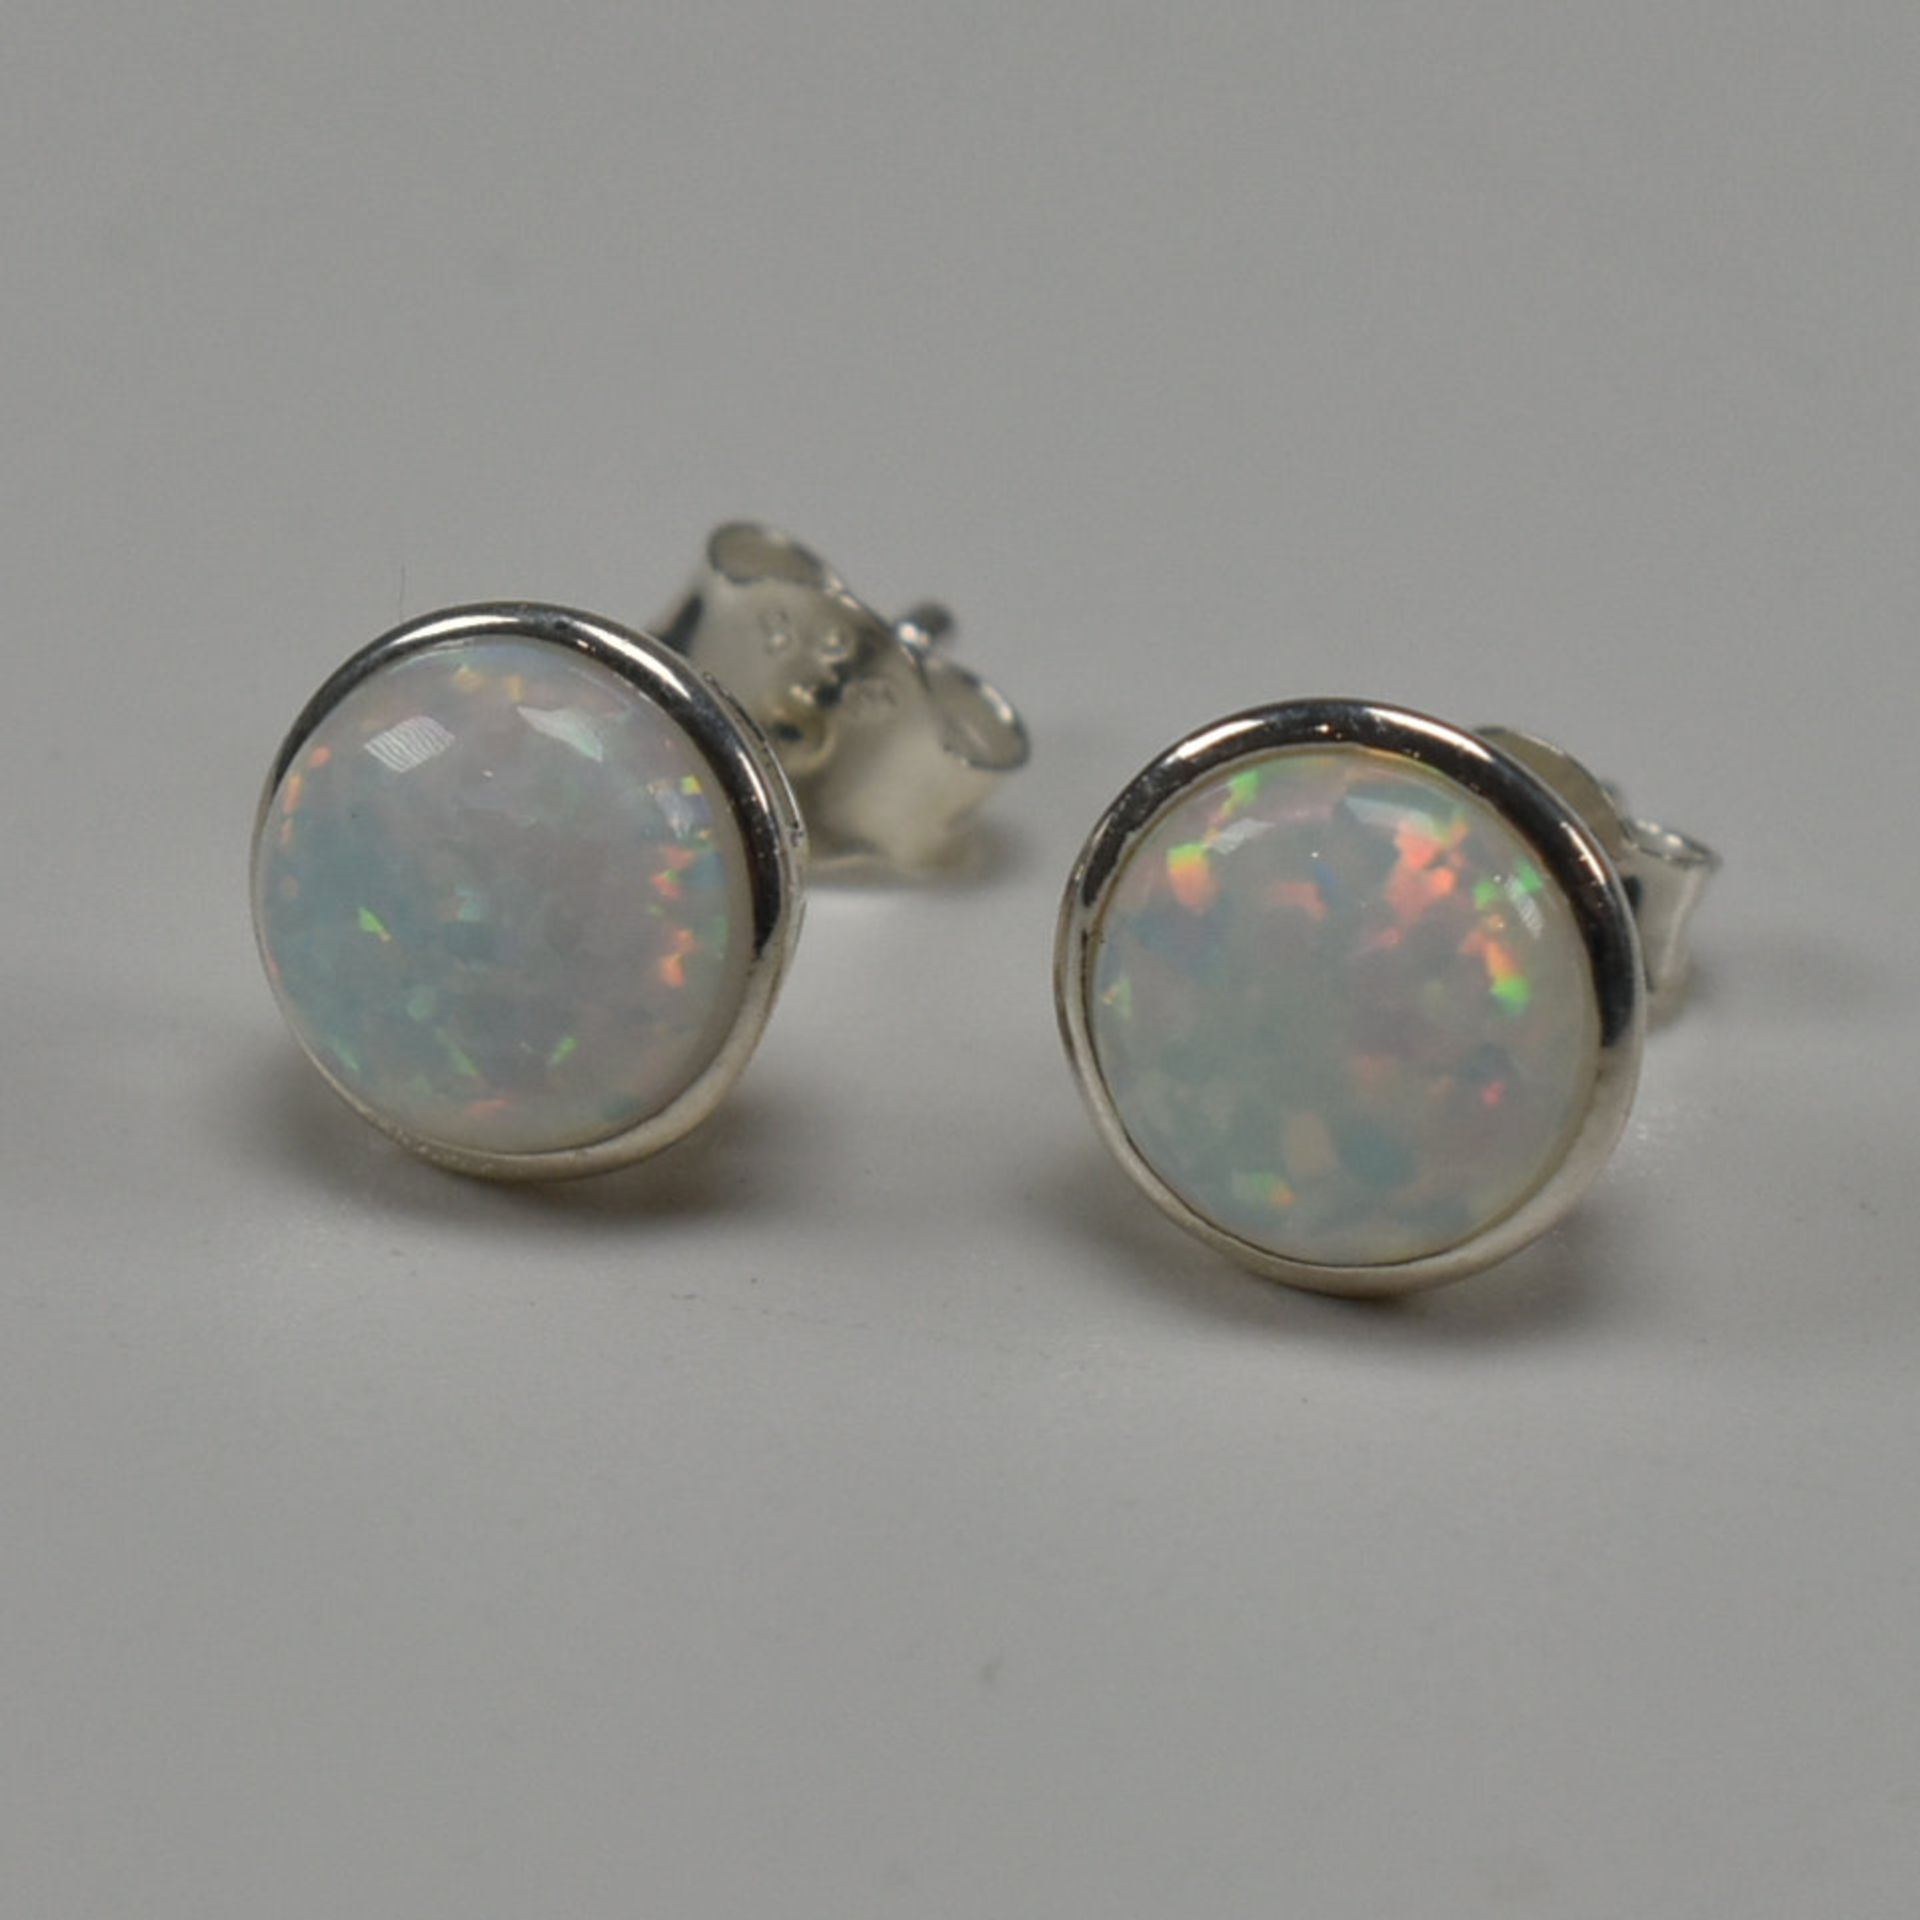 PAIR 925 SILVER & SYNTHETIC OPAL STUD EARRINGS - Image 4 of 6